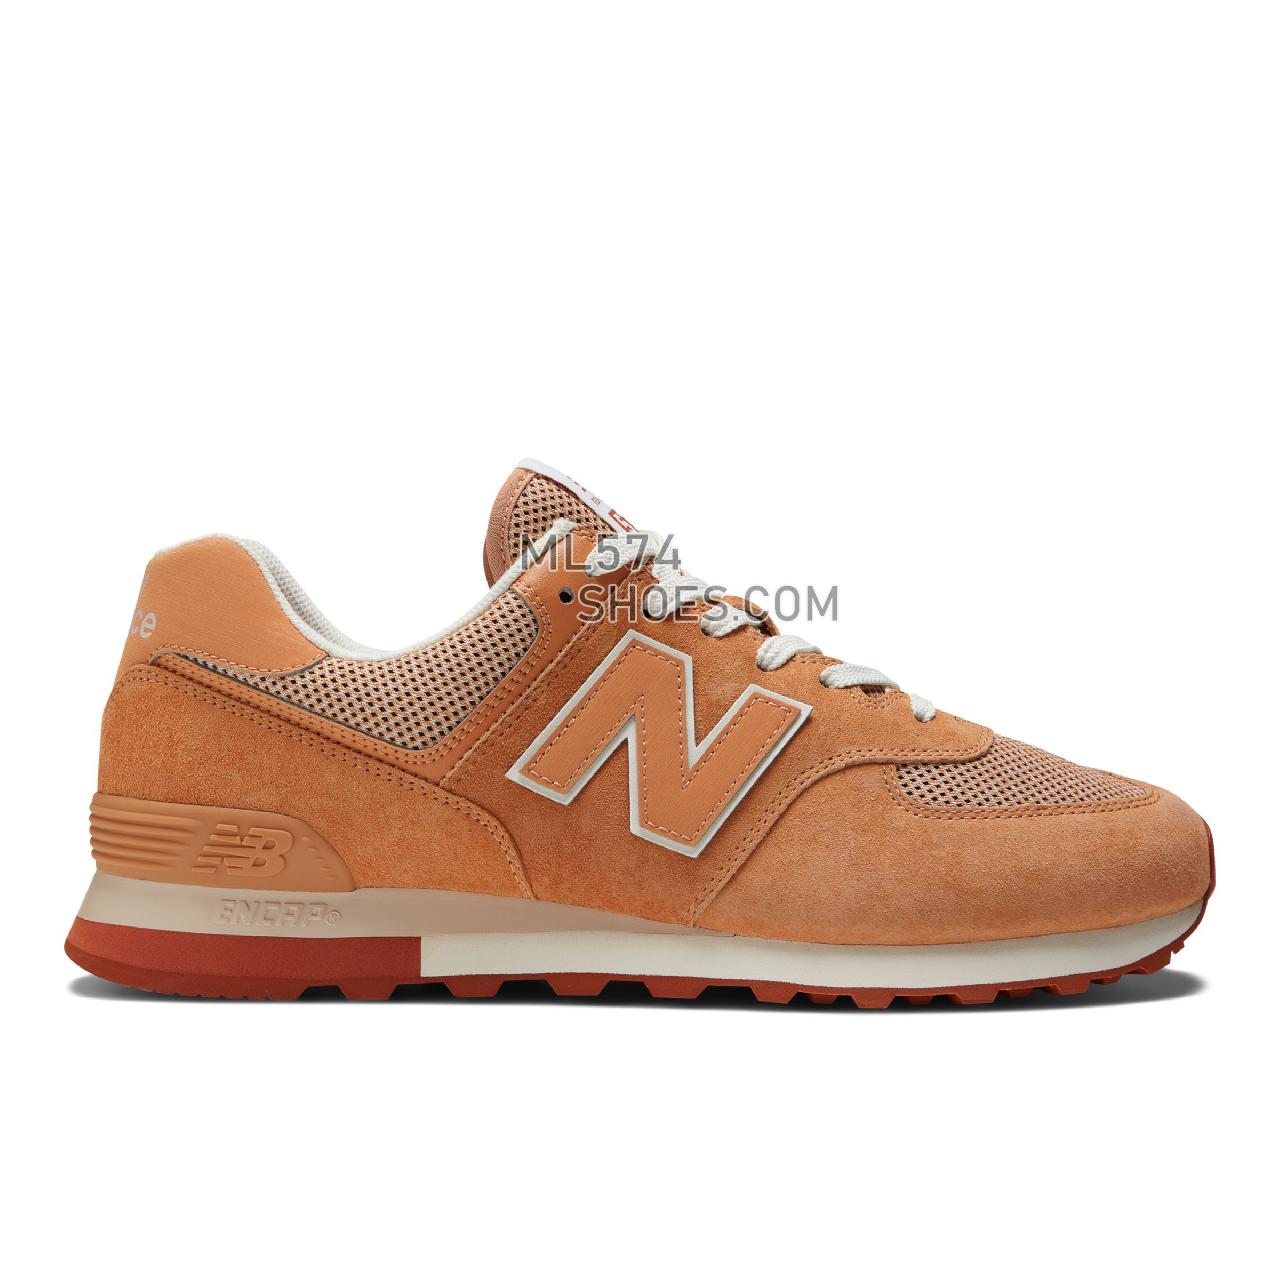 New Balance 574v2 - Men's Classic Sneakers - Caramel with Rust - ML574BT2